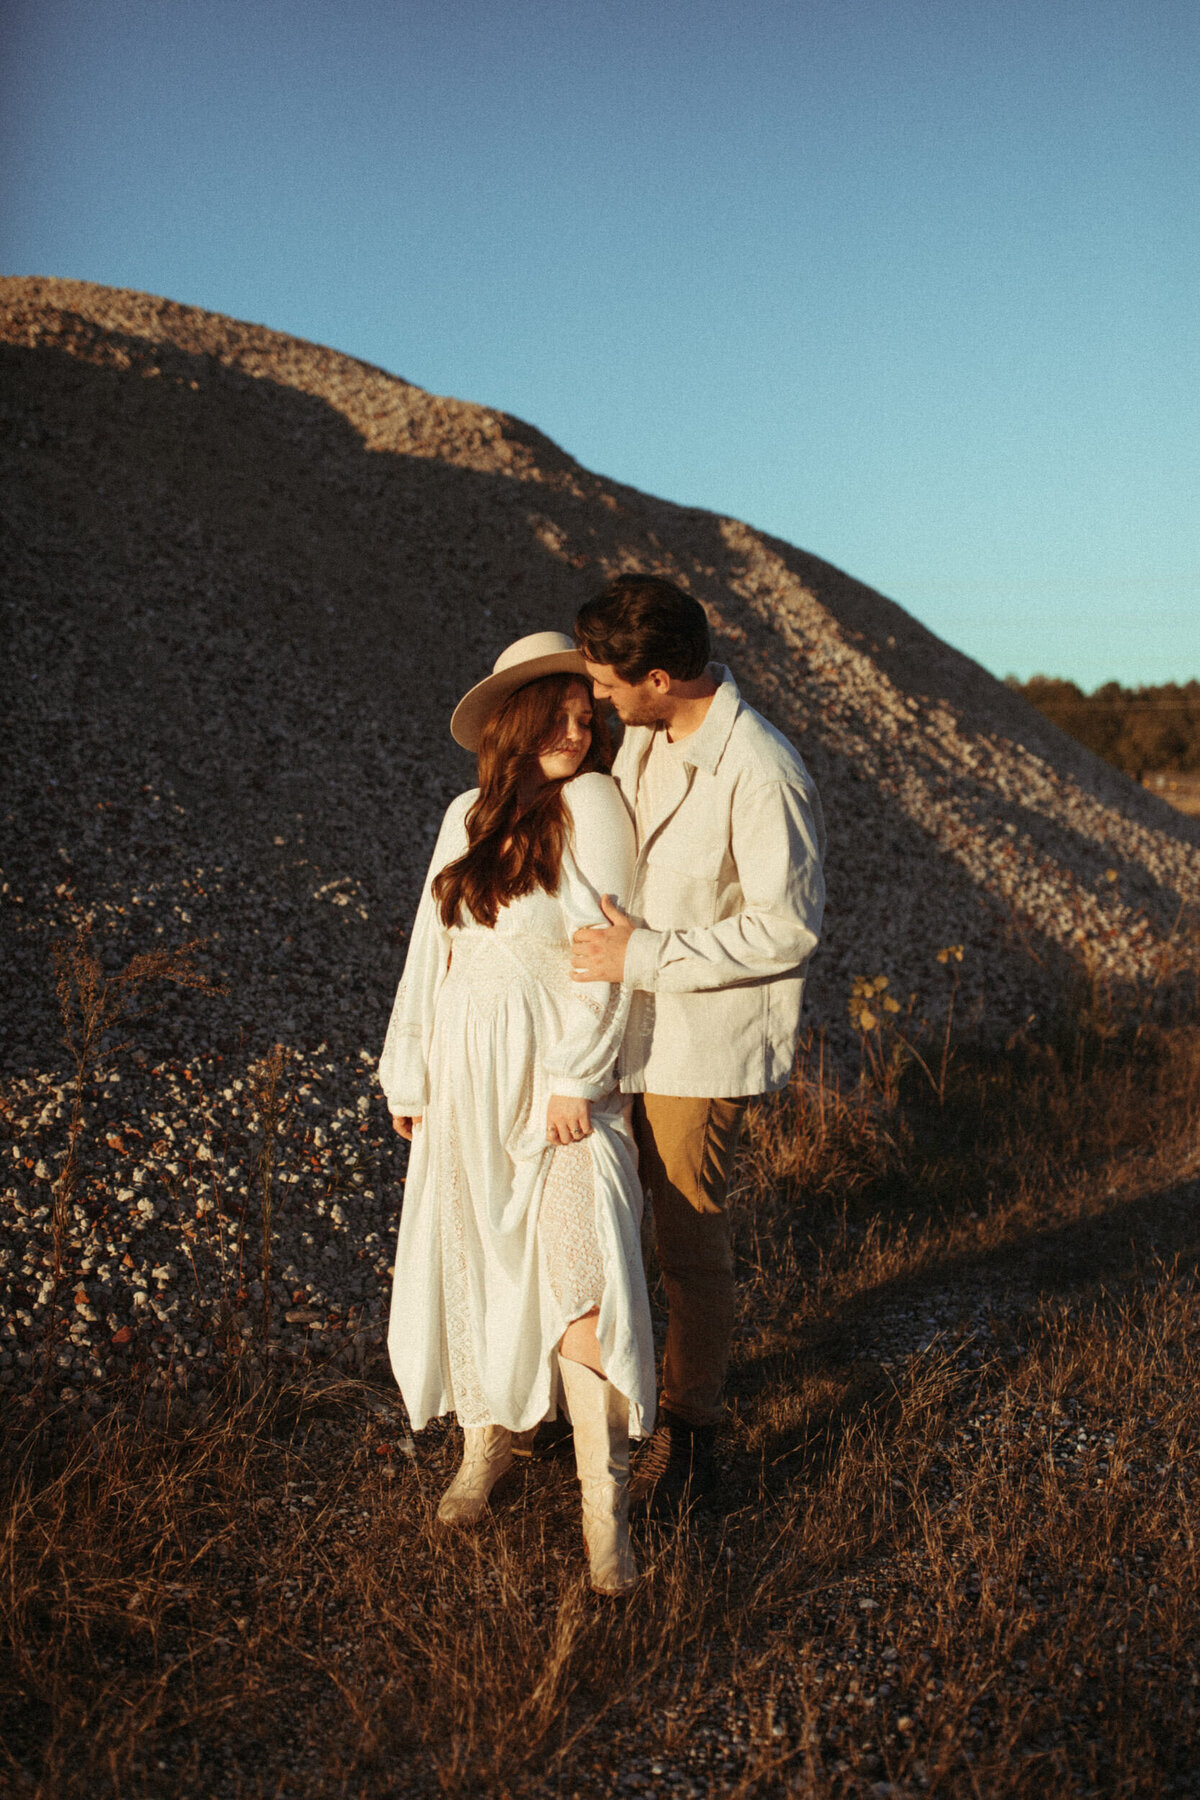 Girl in long white dress, tall white boots and a boho hat standing next to her husband in a white jacket and tan pants in a gravel pit